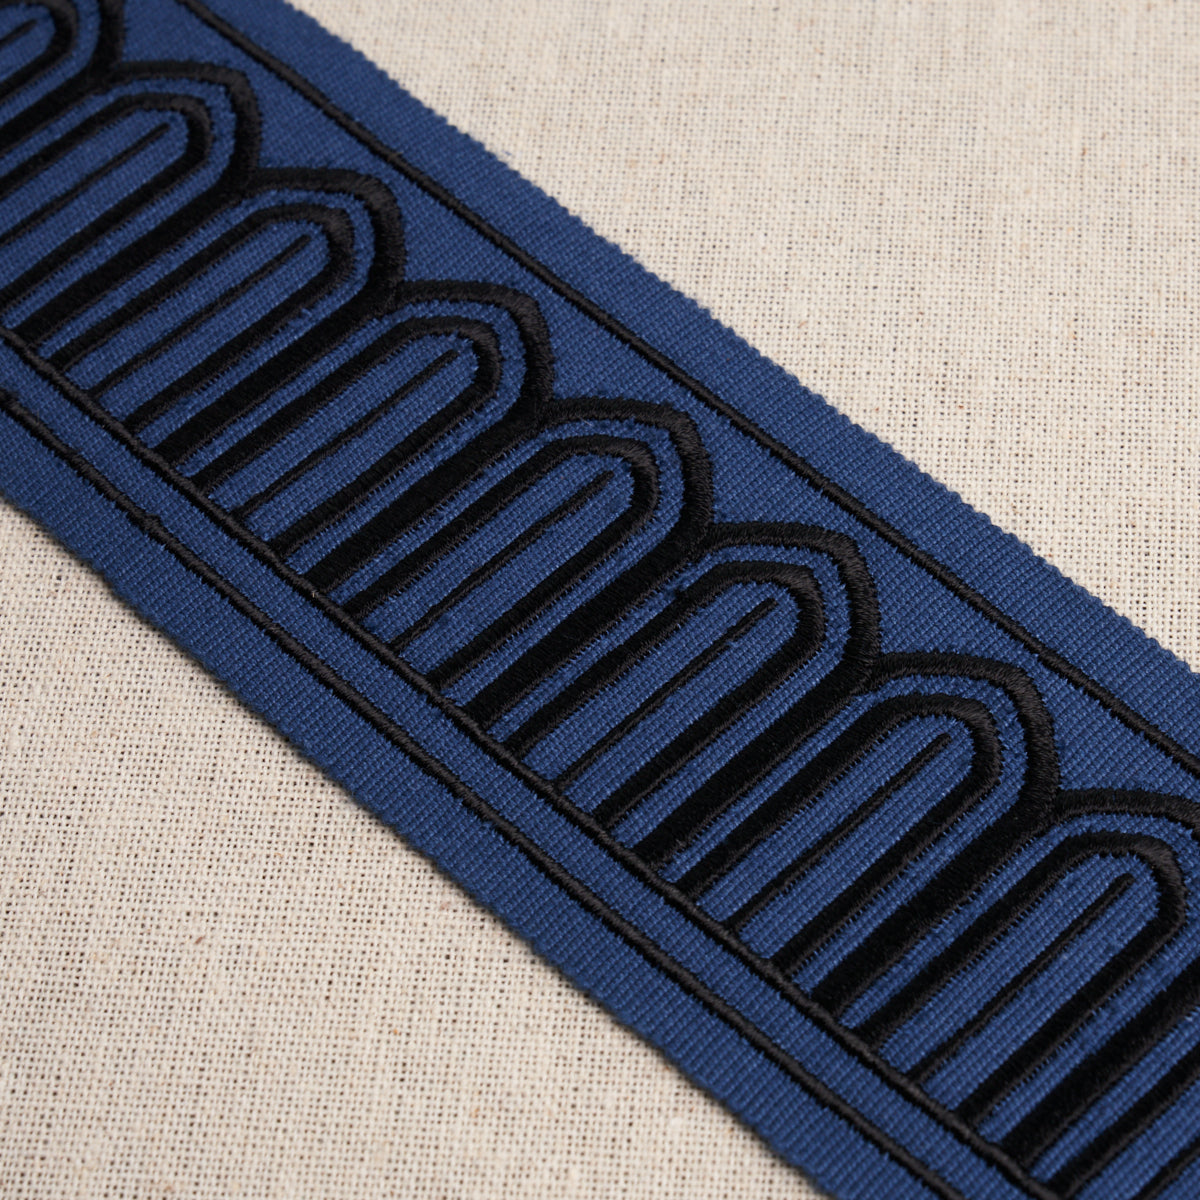 ARCHES EMBROIDERED TAPE MEDIUM | BLACK ON NAVY